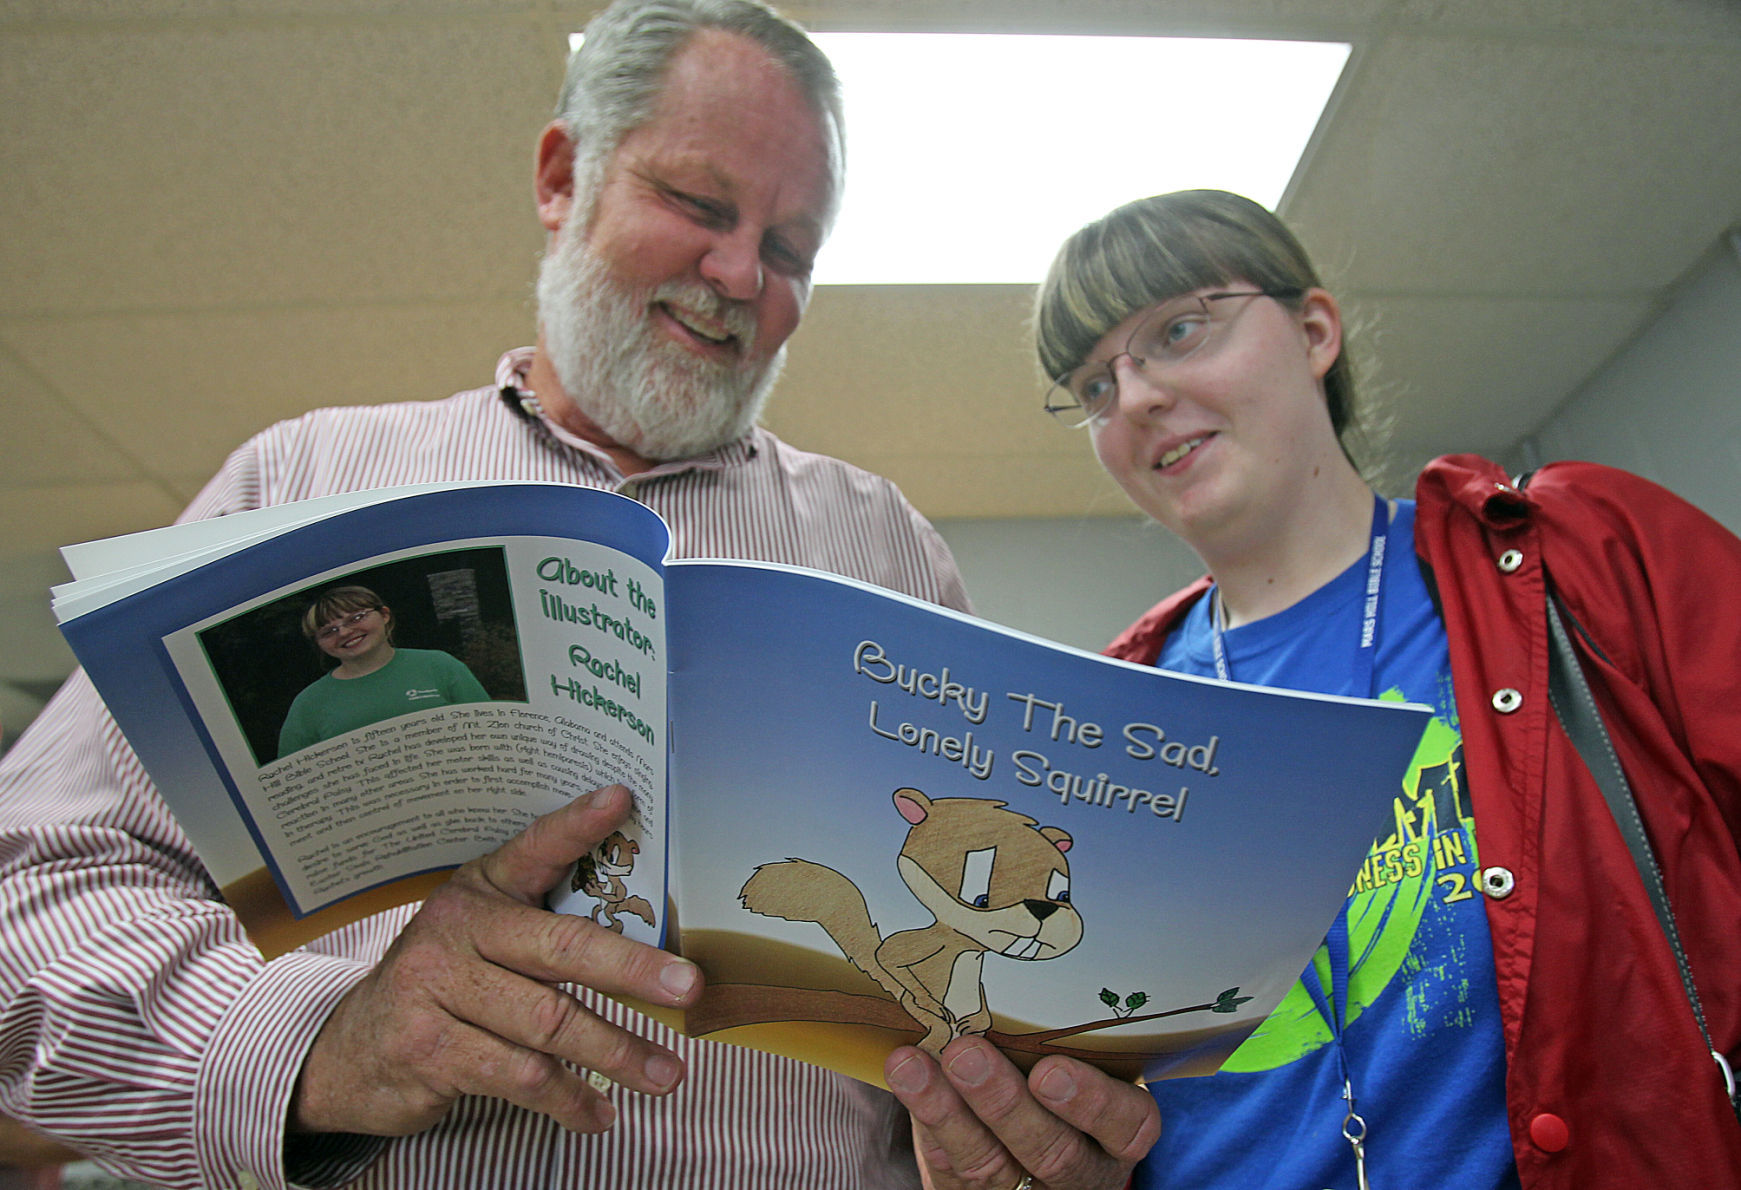 Teamwork Mars Hill Bible School President student Team Up To Publish Book Education